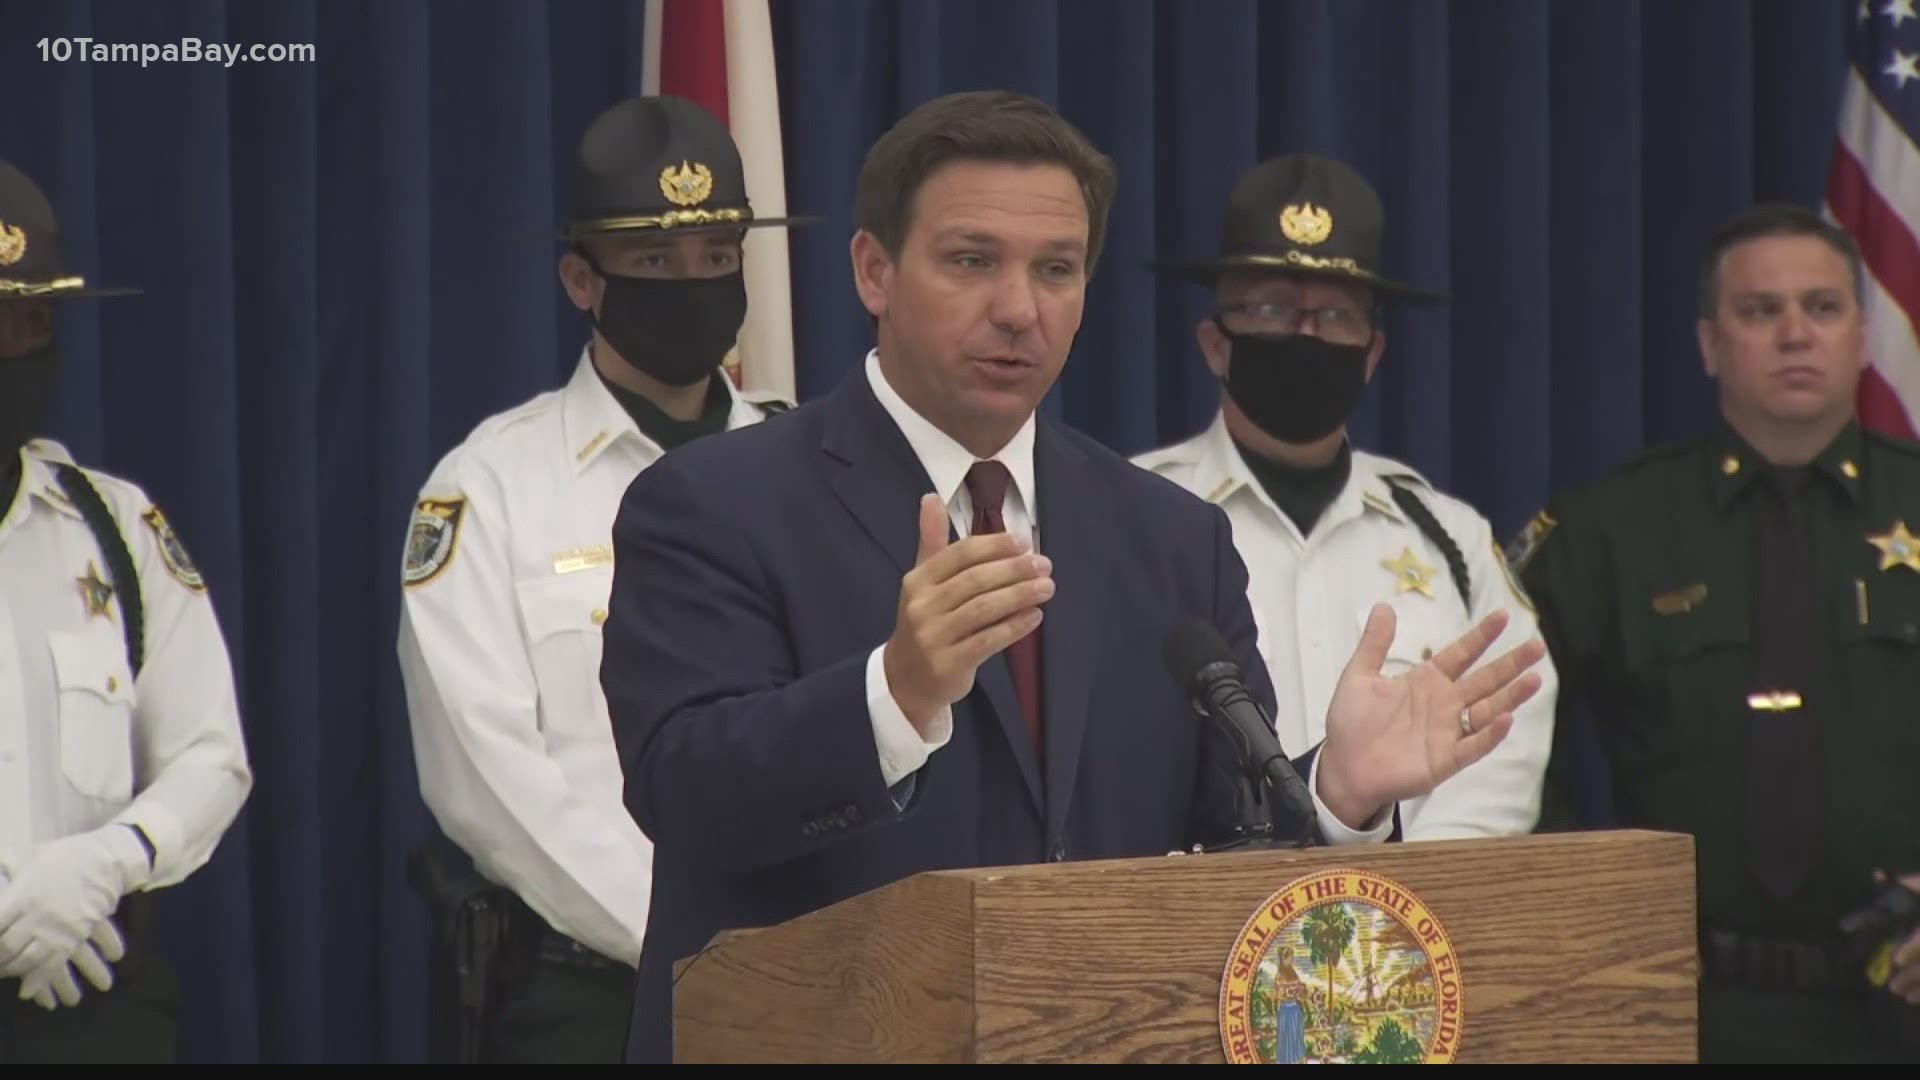 Gov. DeSantis says while the shipment expected on Monday or Tuesday does not appear to be impacted, the same certainly can't be kept for the future.